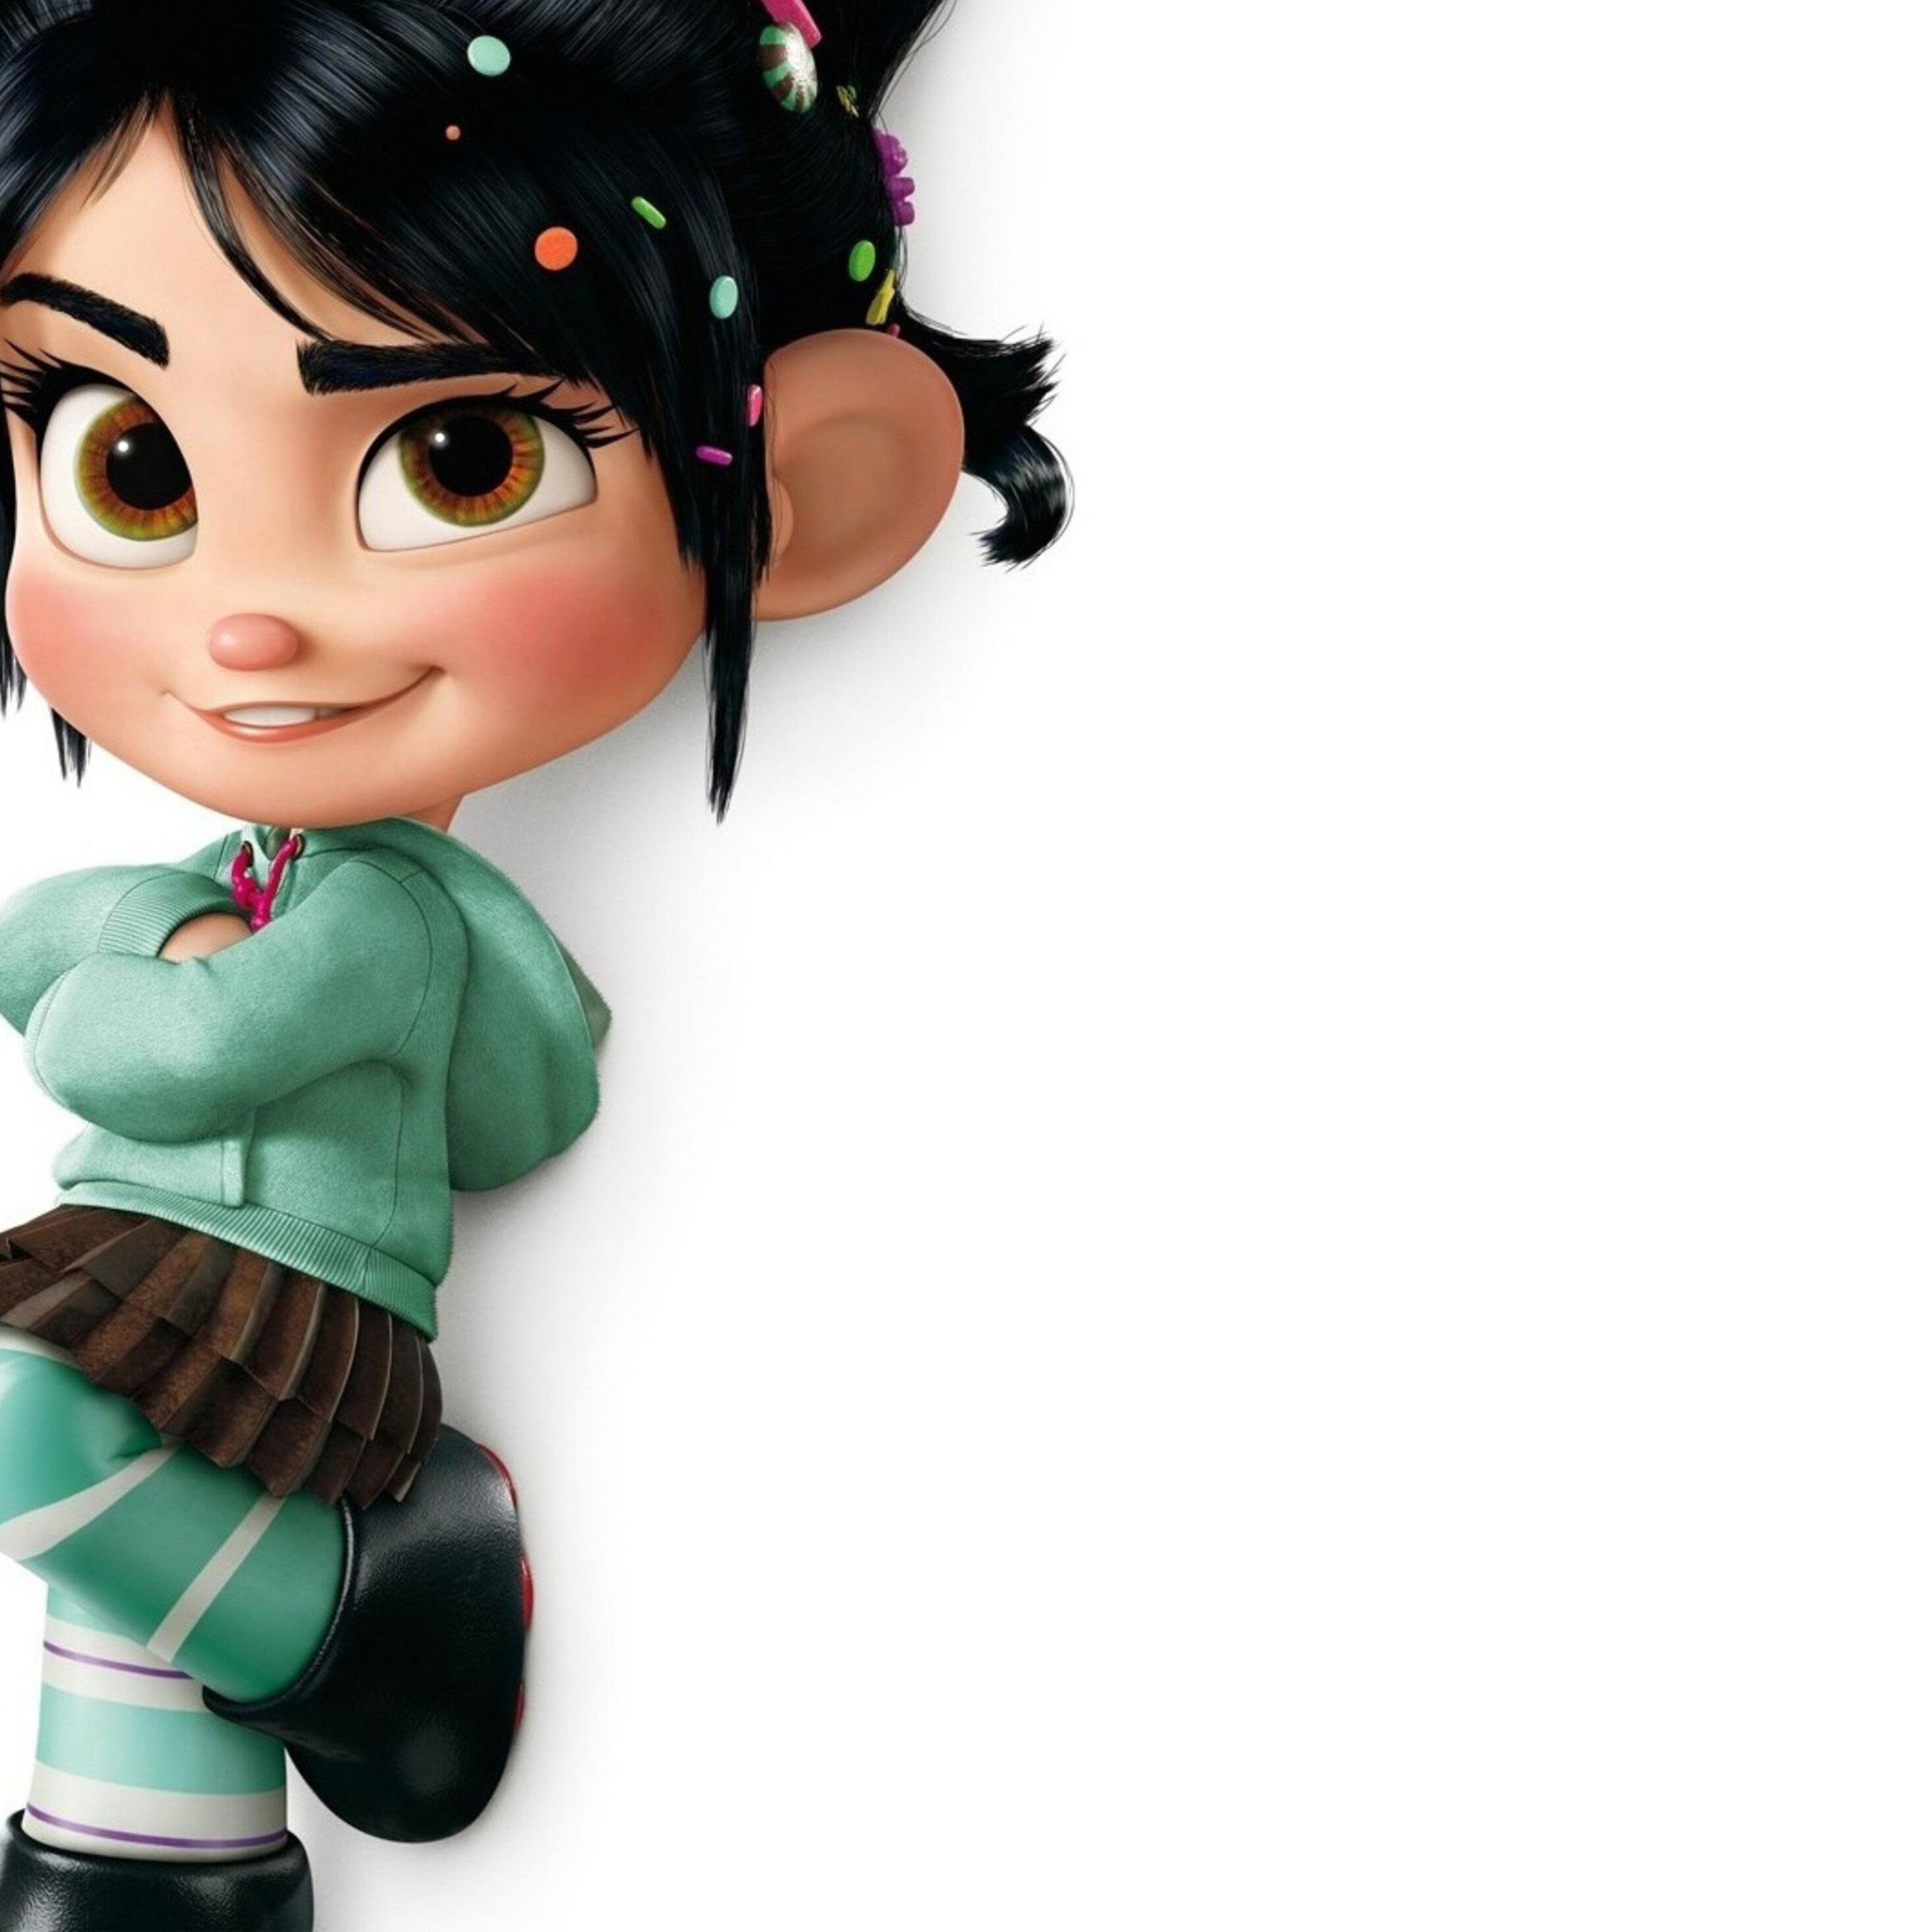 Vanellope Wreck It Ralph In 2932x2932 Resolution. 